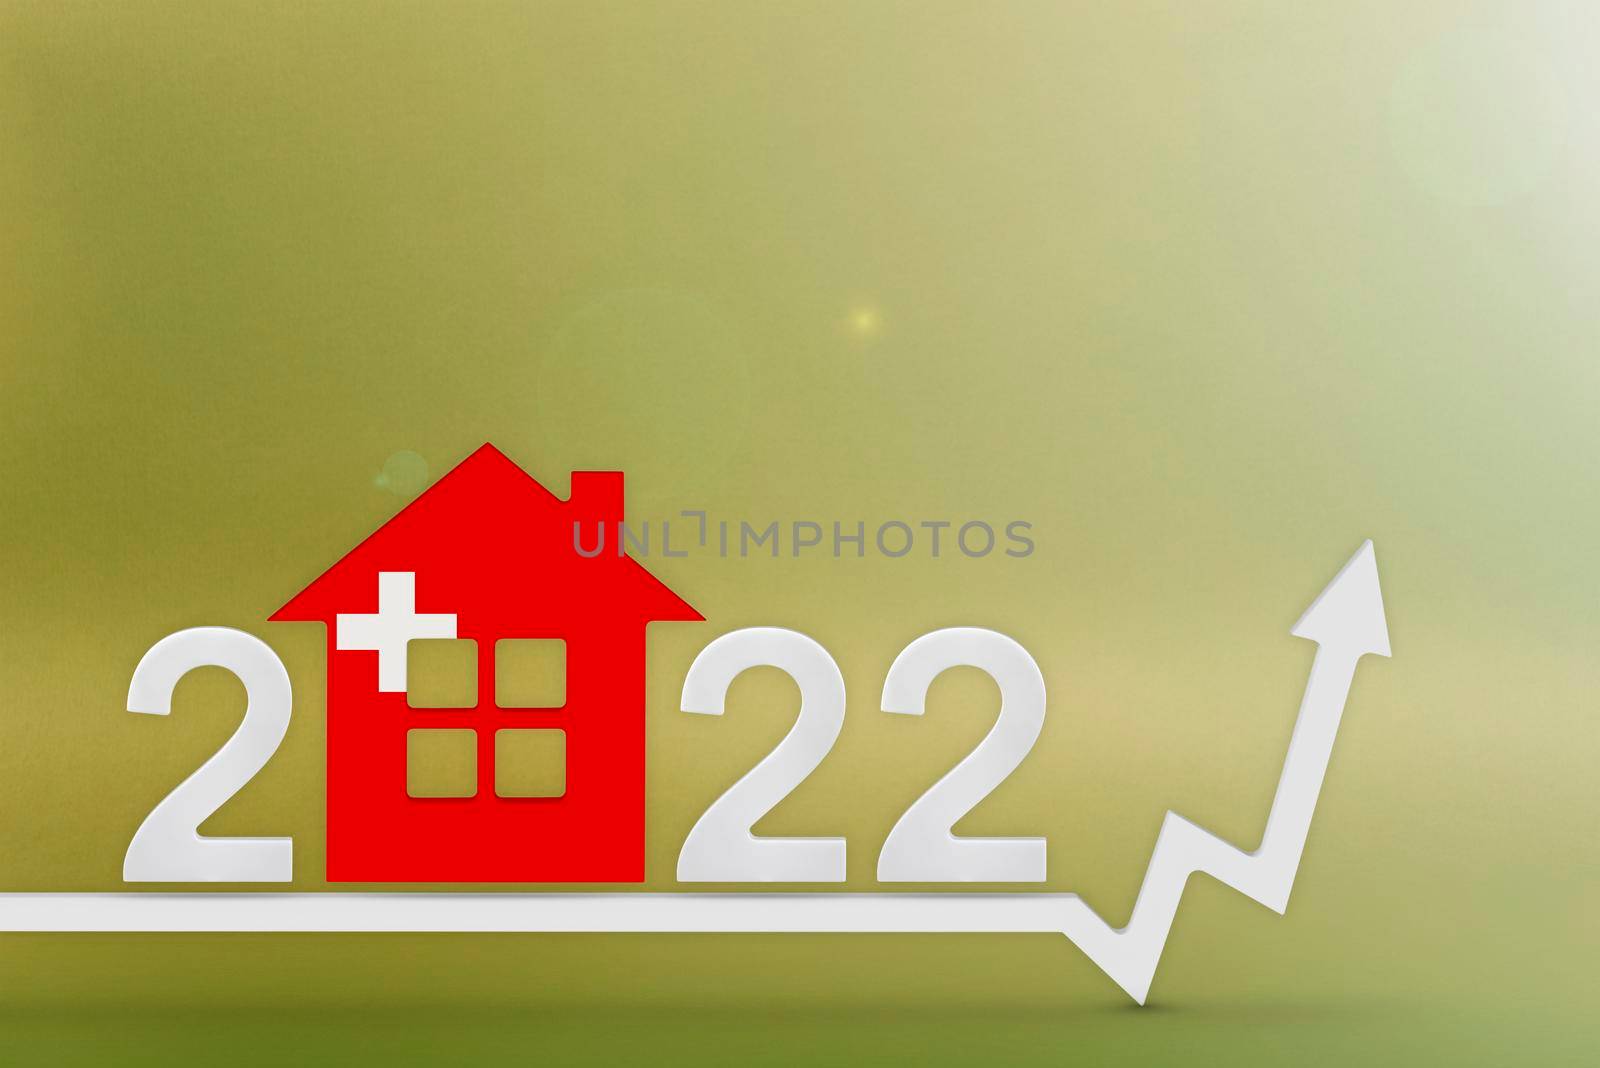 The cost of real estate in Switzerland in 2022. Rising cost of construction, insurance, rent in Switzerland. House model painted in flag colors, up arrow on yellow background by SERSOL